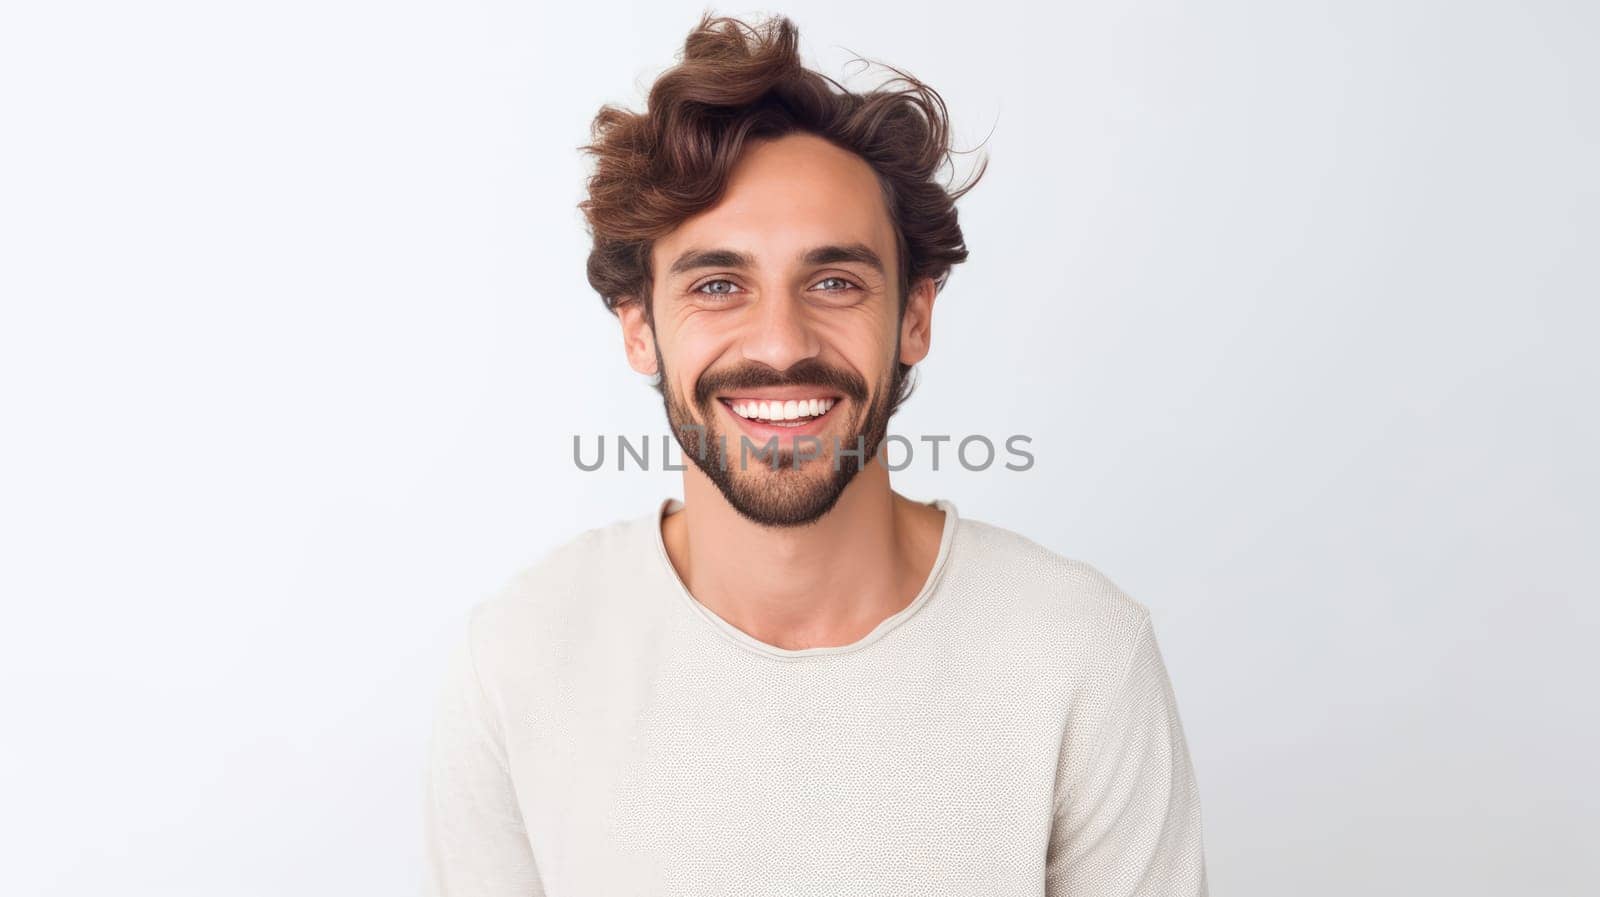 Portrait of happy smiling guy with white teeth looking at camera on white background